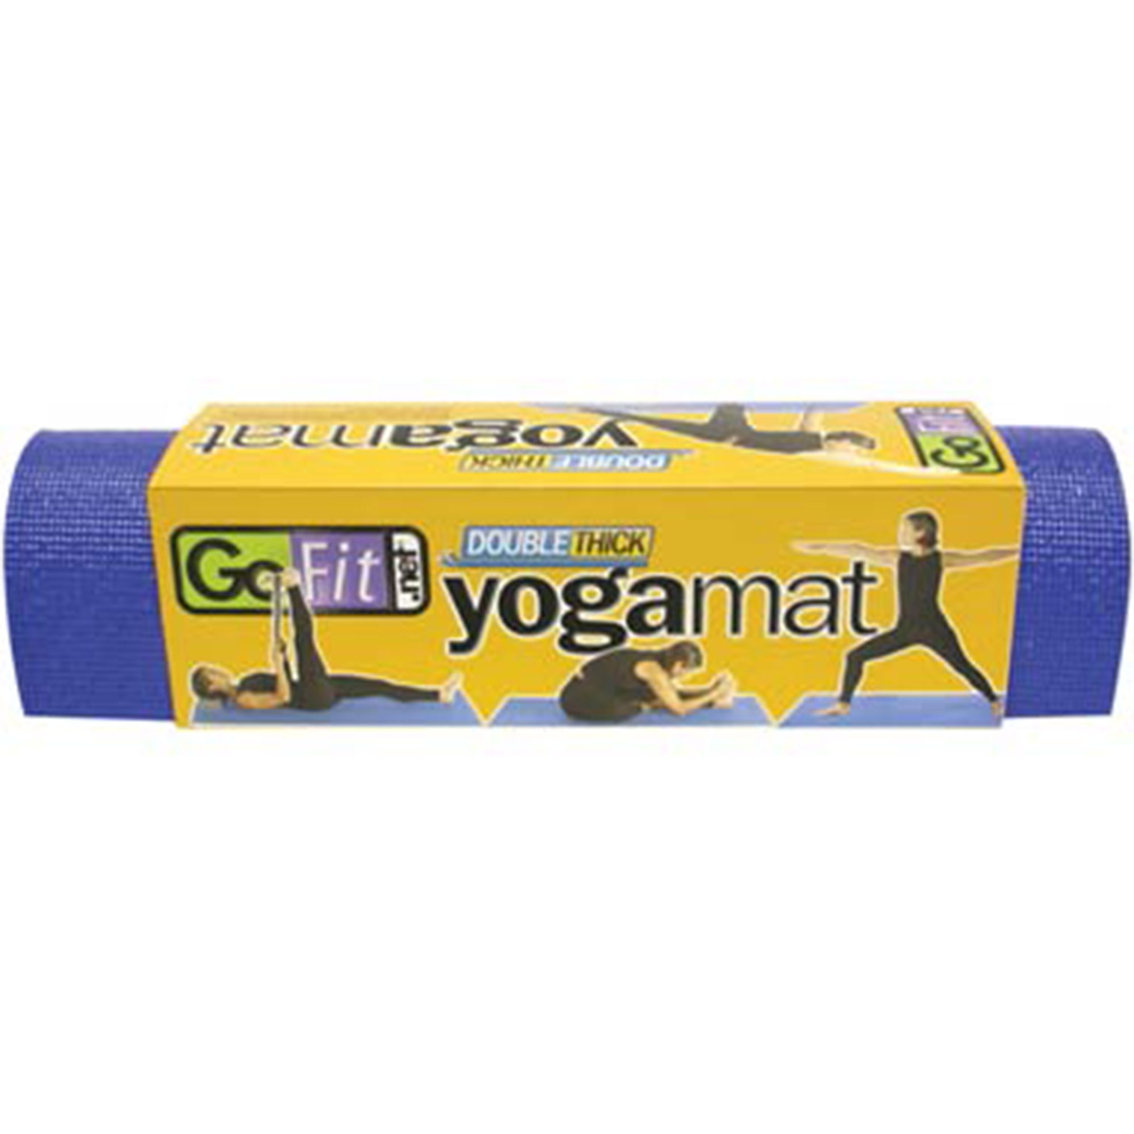 GoFit Double Thick Yoga Mat - Image 2 of 2